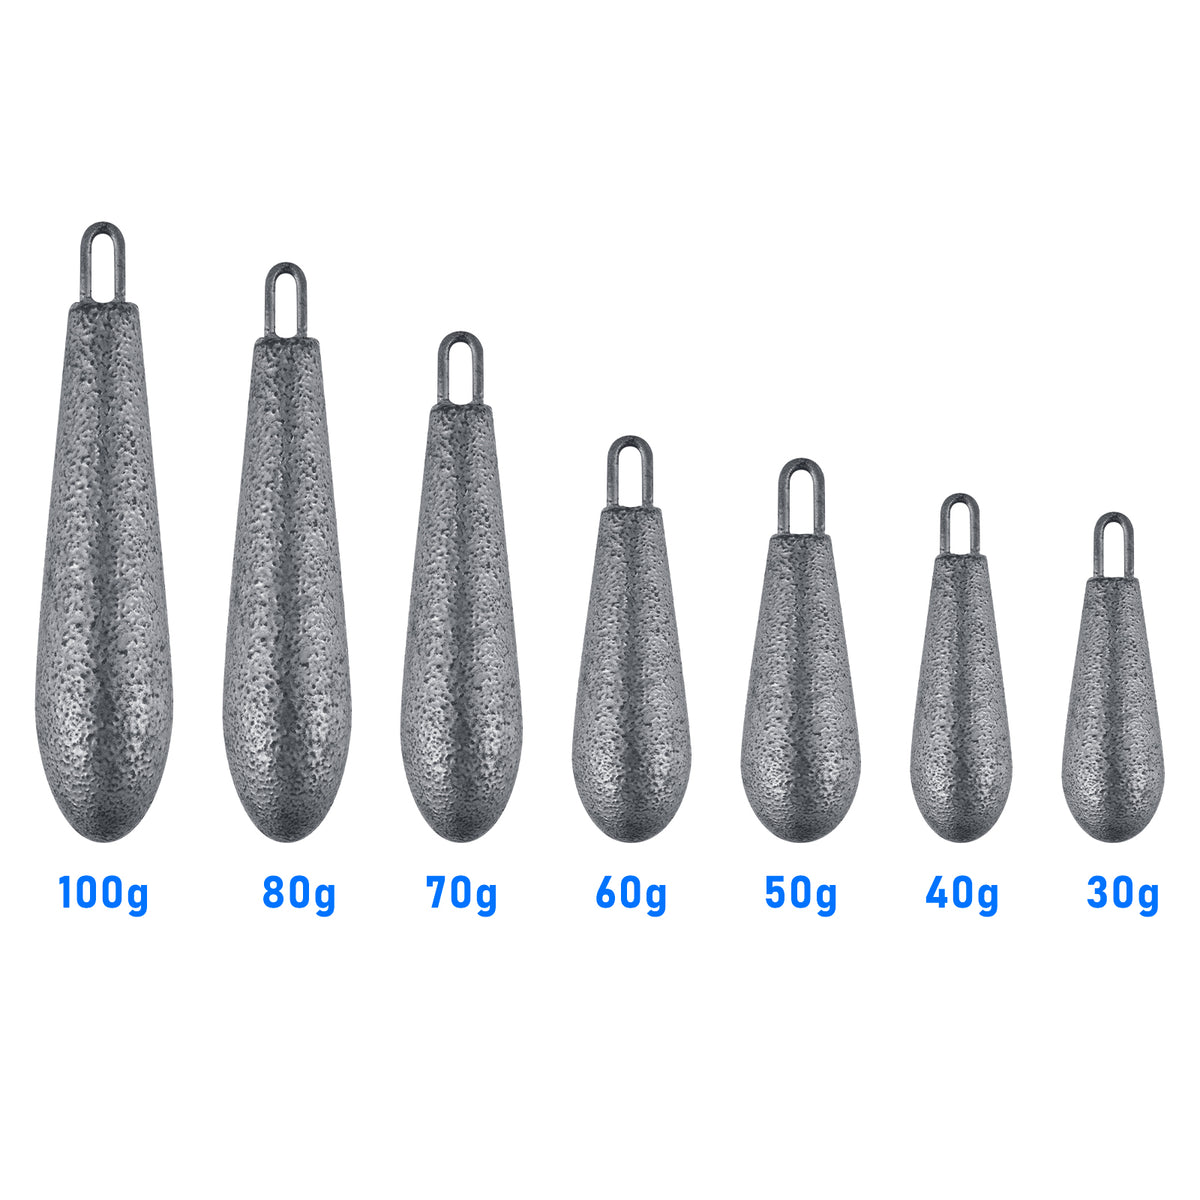 Dr.FishTapered Steel Fishing Weight 30g-100g